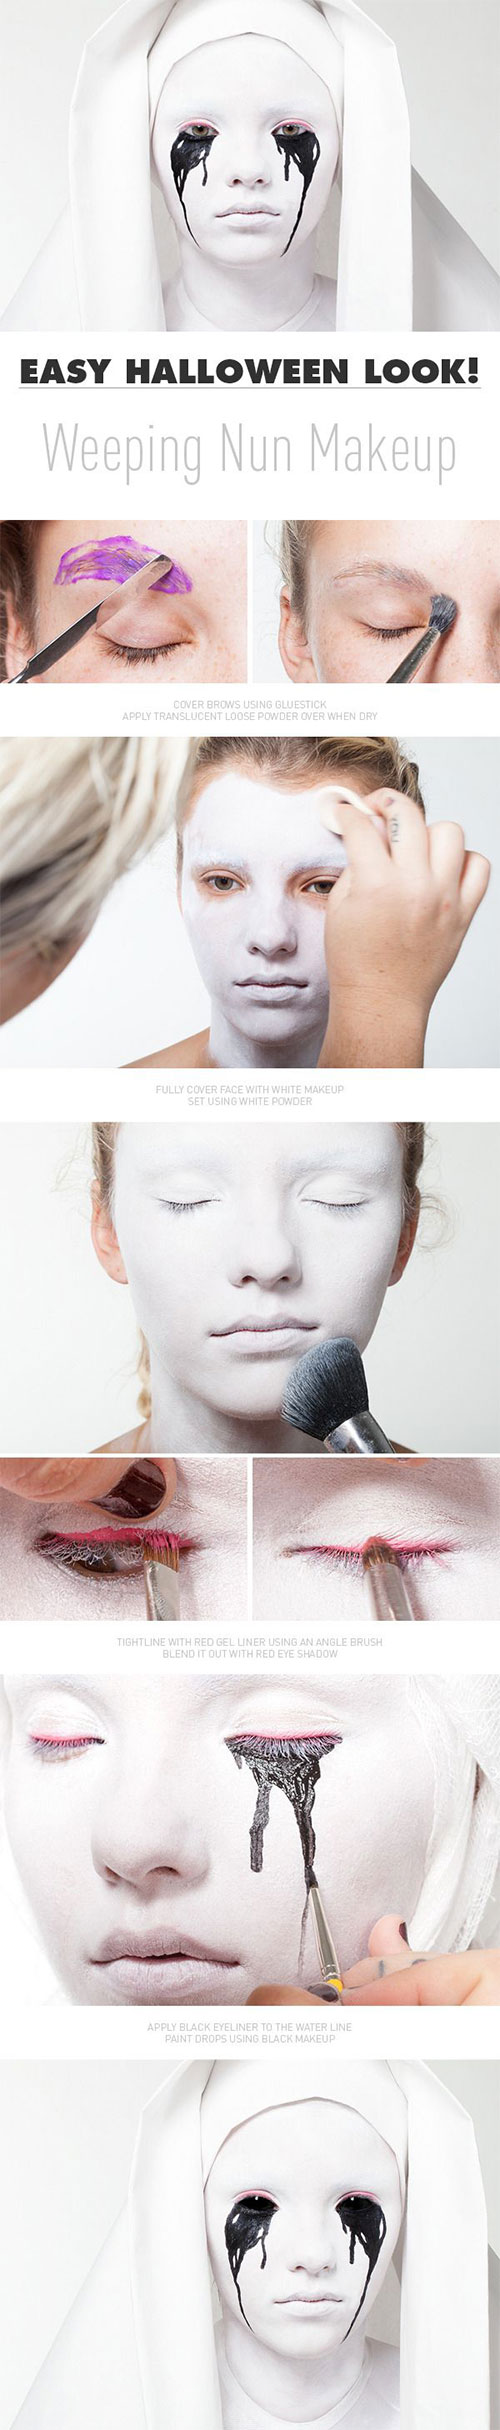 15-Step-By-Step-Halloween-Make-Up-Tutorials-For-Beginners-Learners-2014-13